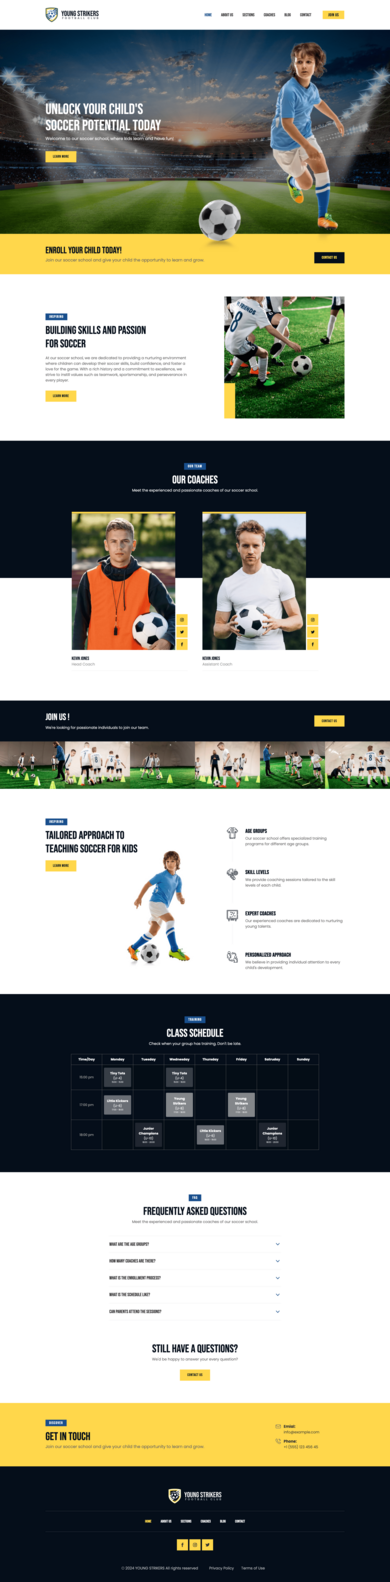 Responsive Contao theme for schools and sports academy – Sport Contao Themes